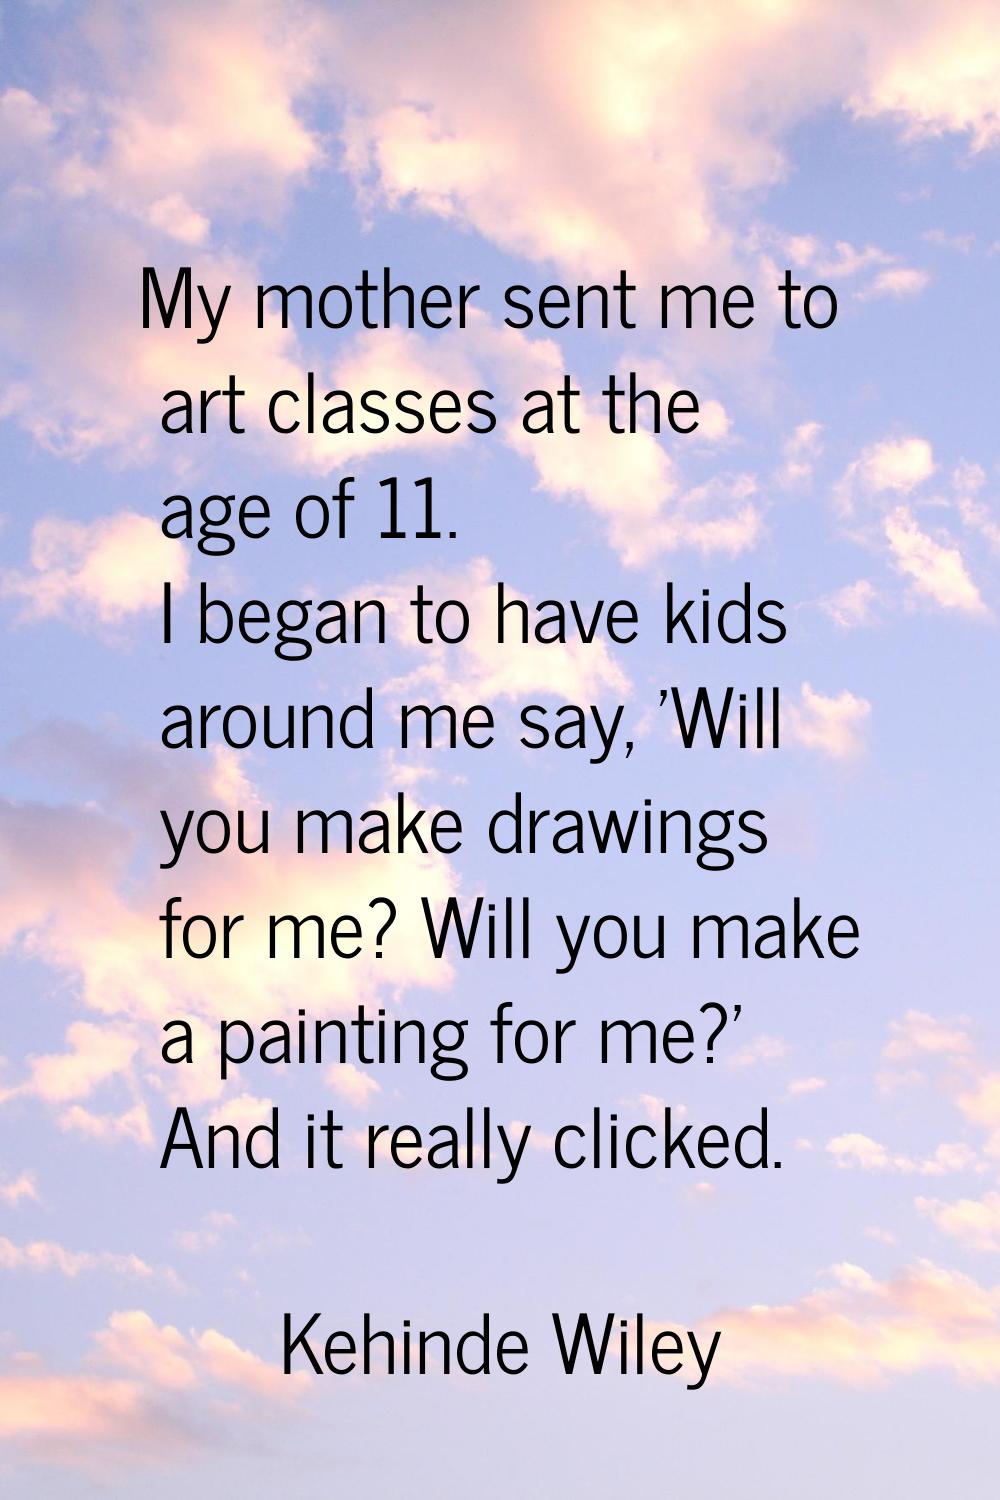 My mother sent me to art classes at the age of 11. I began to have kids around me say, 'Will you ma